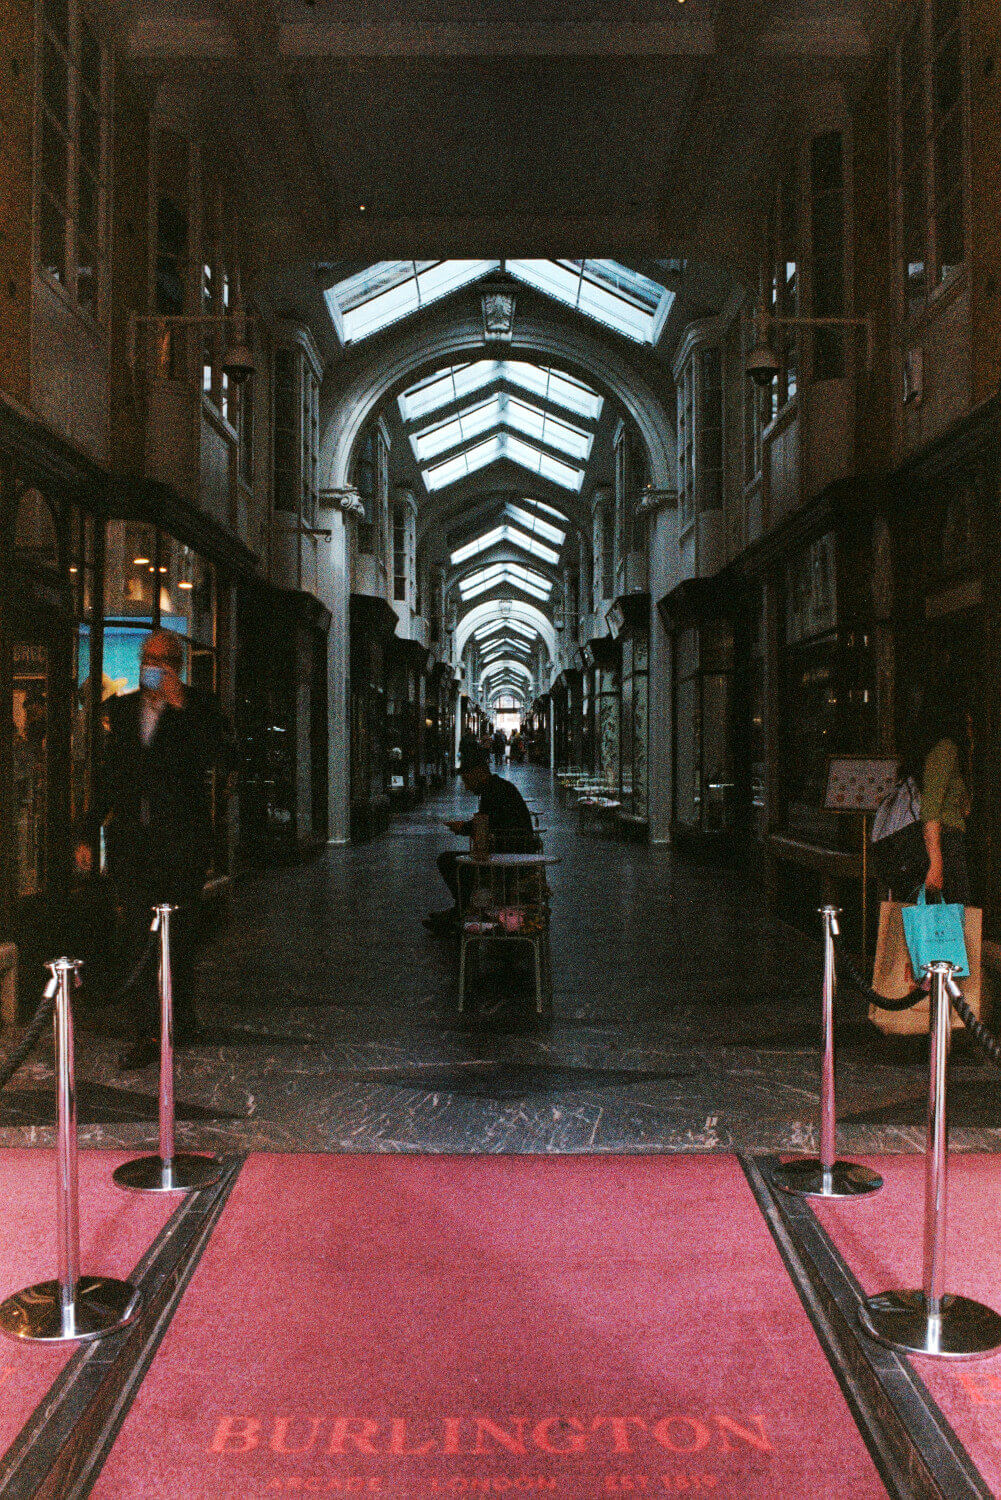 The Burlington Arcade, London: 5 Frames... With a Canon A-1 and a roll of 1987 Sainsbury's Colour Print Film (CPF) and a Canon A1 - by James Patrick